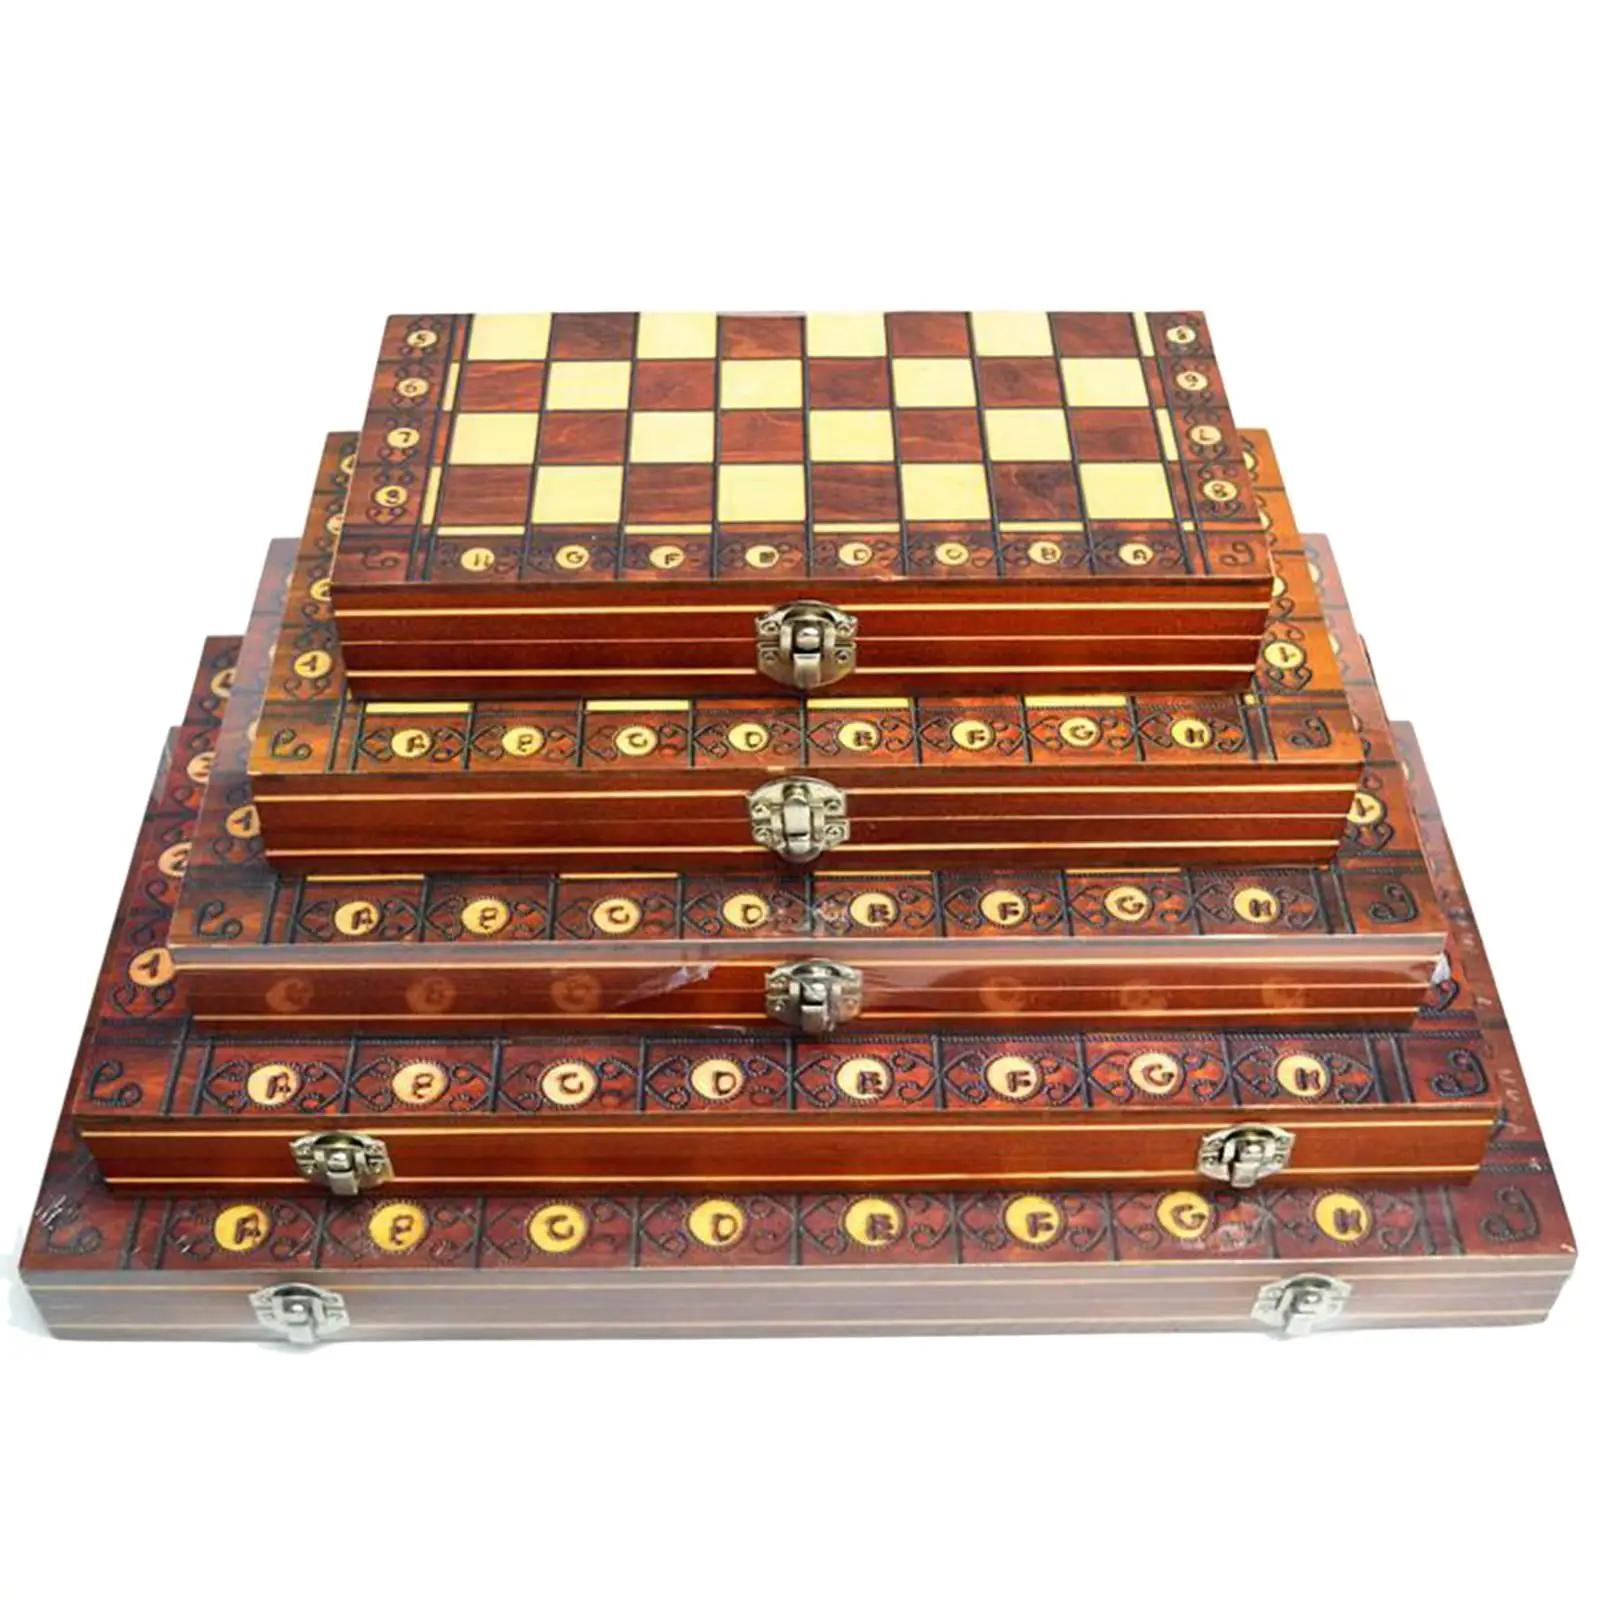 Travel Folding Board Game 3 In 1 Wooden Chess Checkers Backgammon Set Magnetic Chess Board Game Set